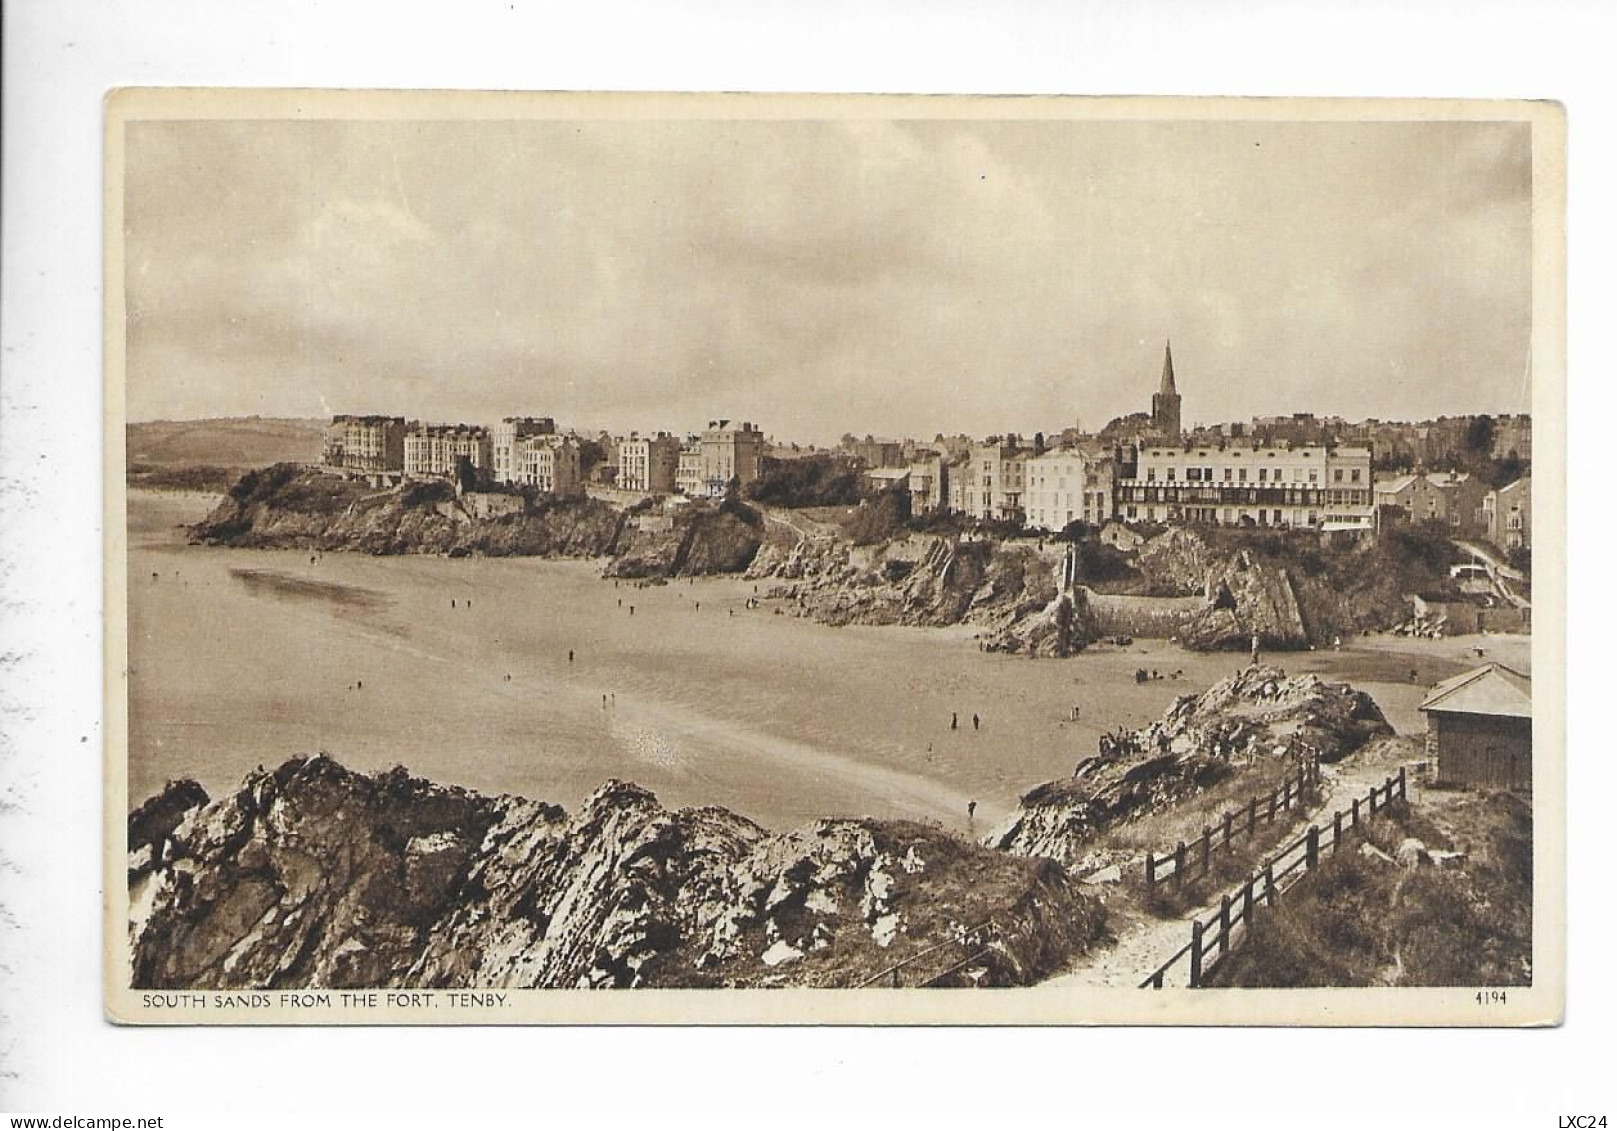 SOUTH SANDS FROM THE PORT. TENBY. - Pembrokeshire